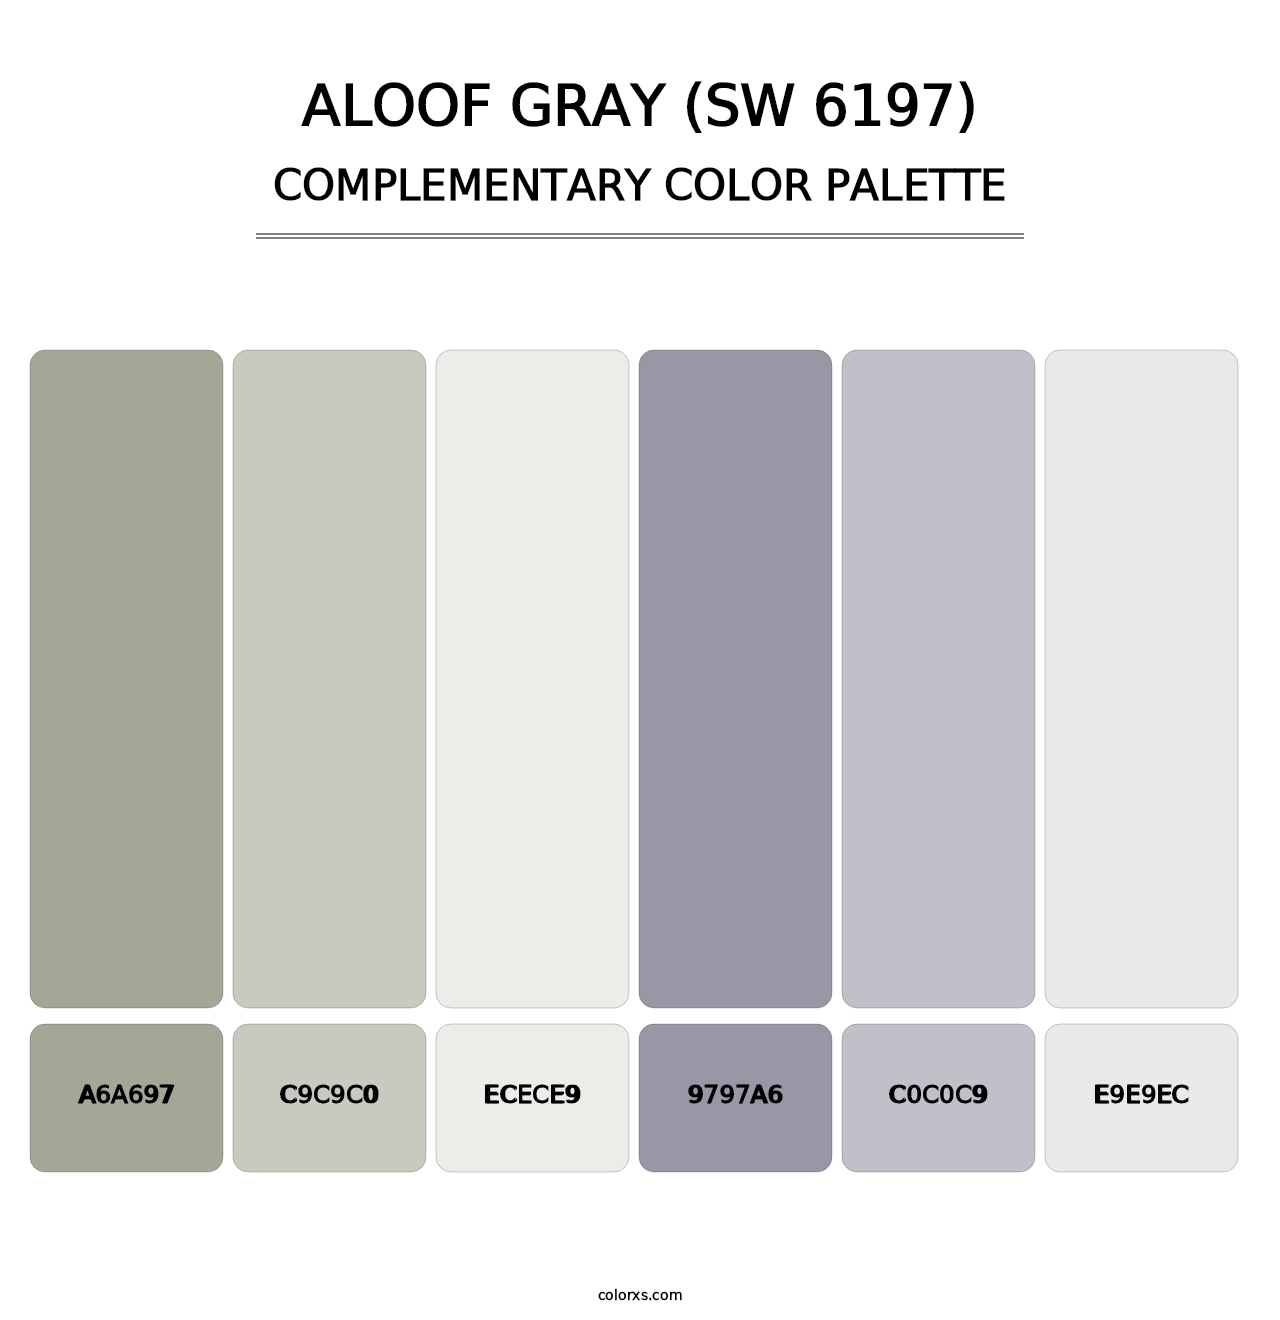 Aloof Gray (SW 6197) - Complementary Color Palette